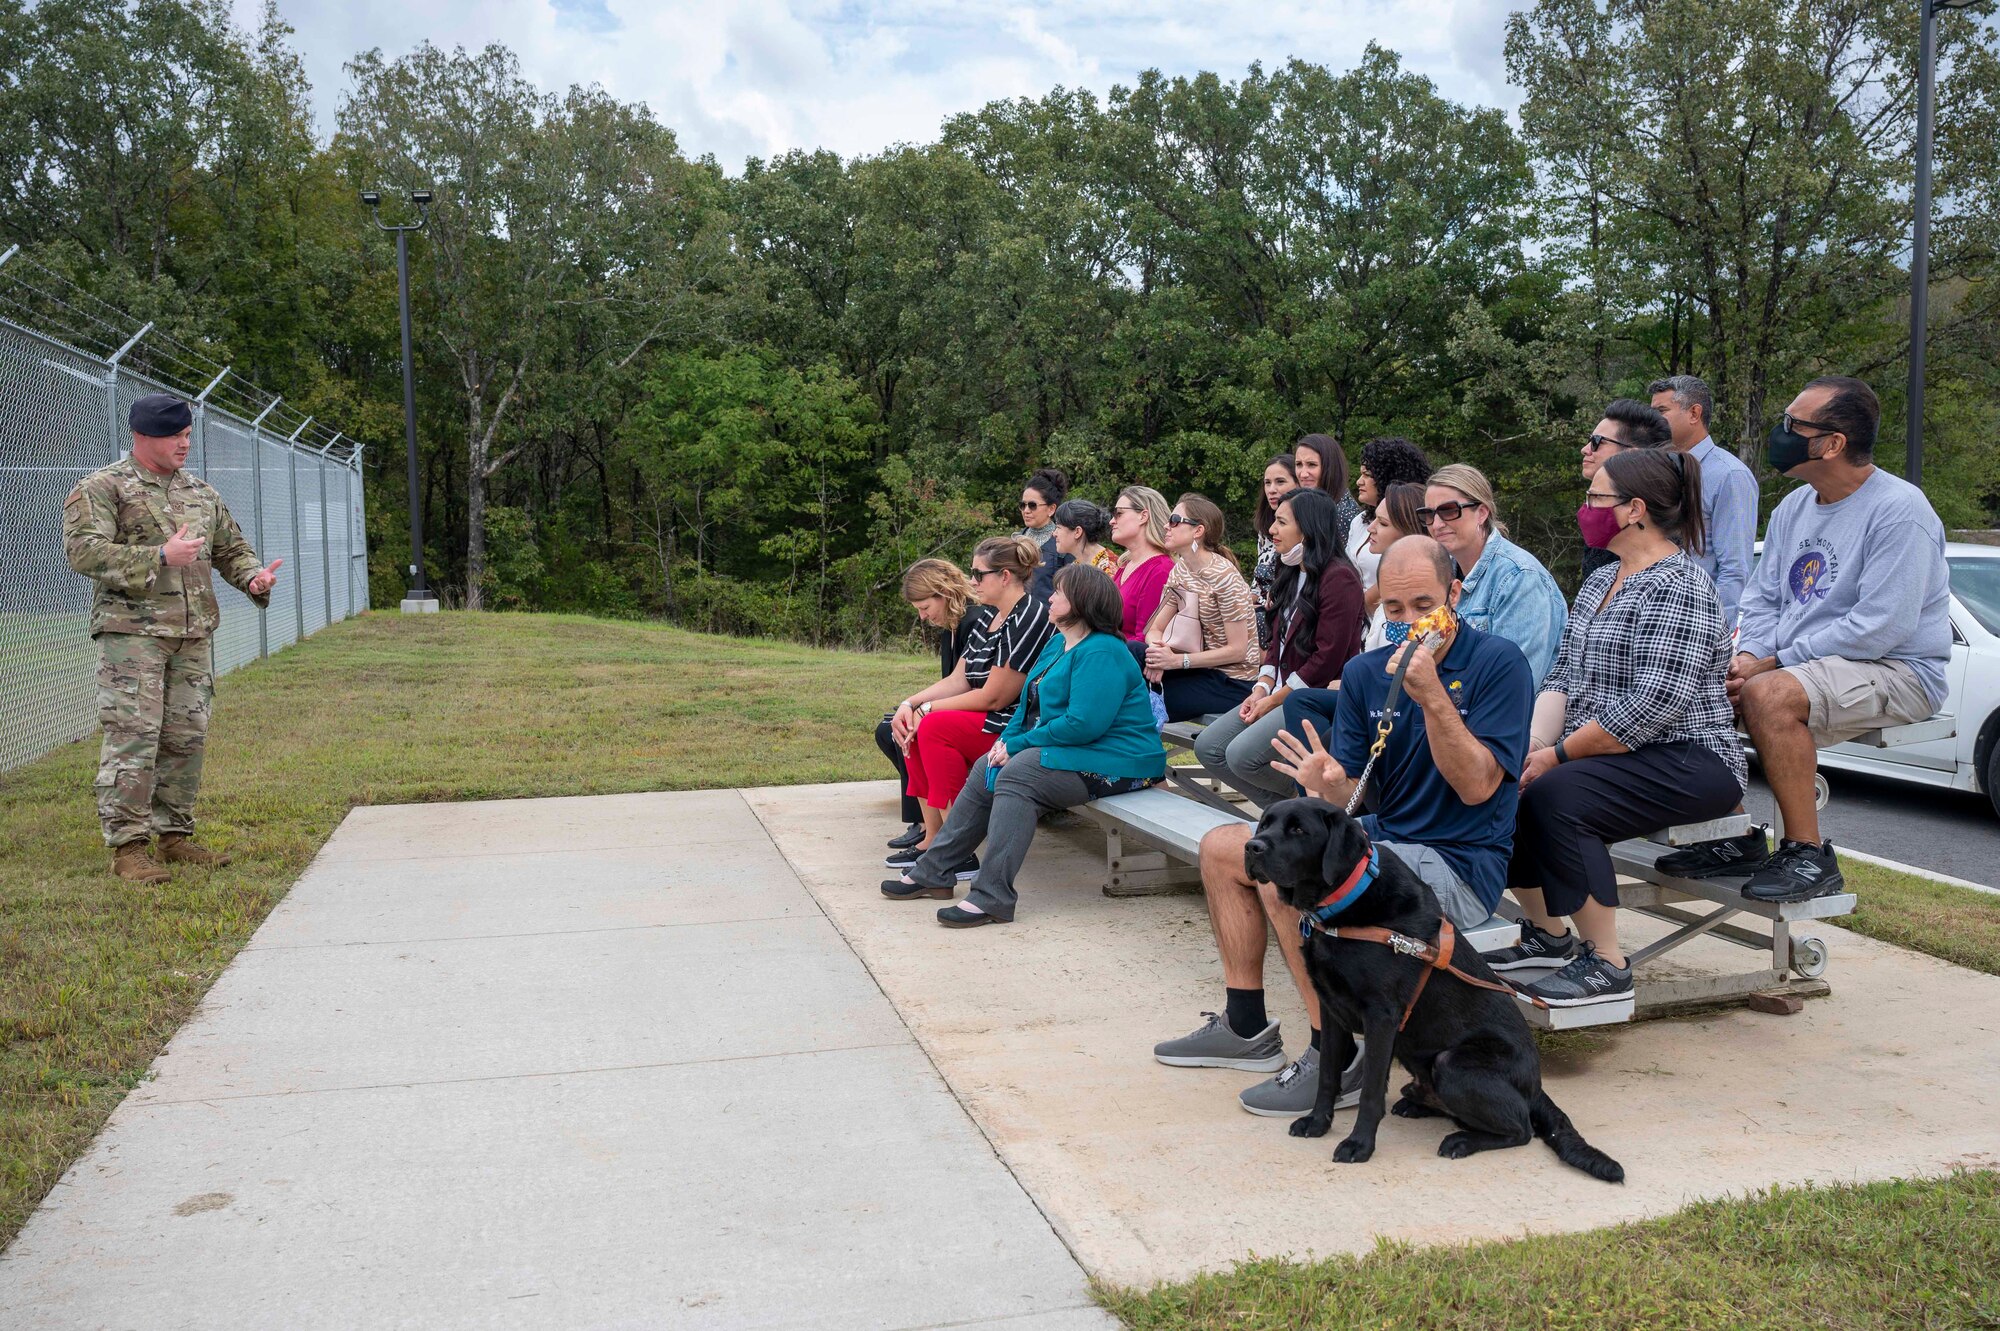 Military spouses sit on a bleacher near the military working dog facility.